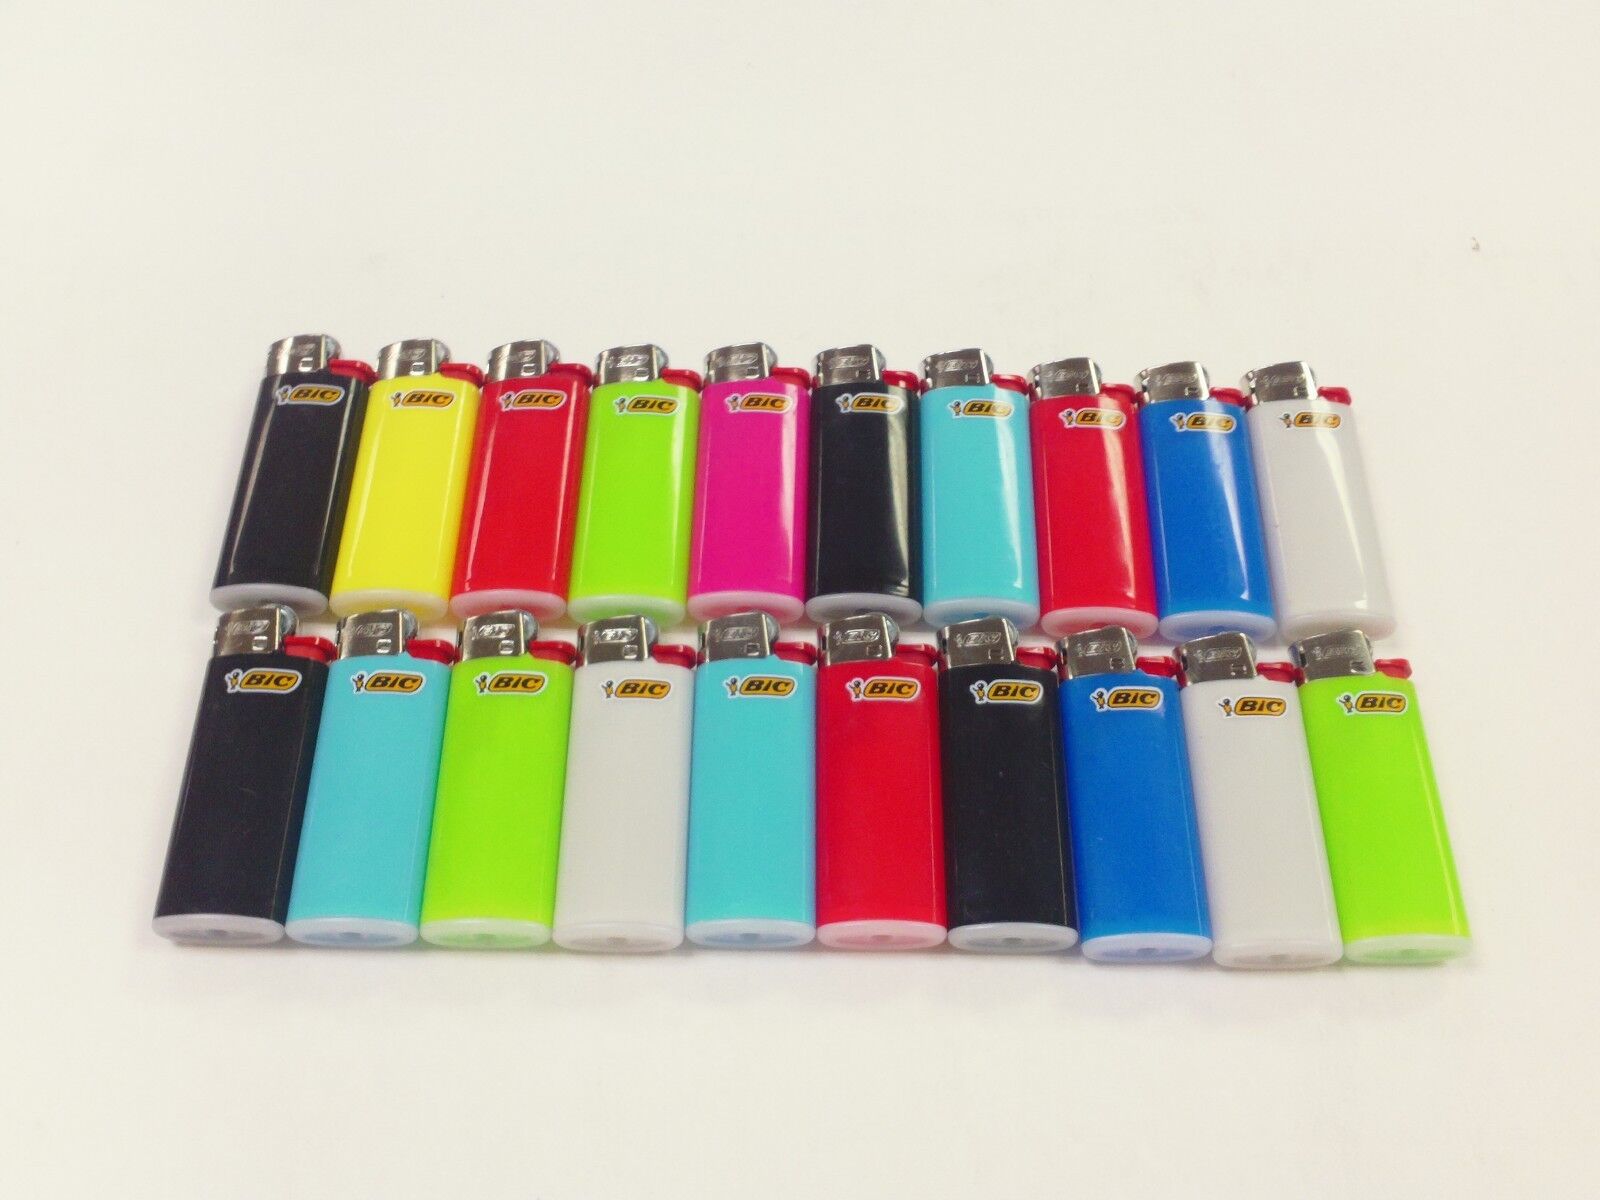 20 MINI BIC LIGHTER ASSORTED COLOR OR DESIGN SMALL BIC WITH FLUID NOT REFILLABLE. Available Now for 27.95